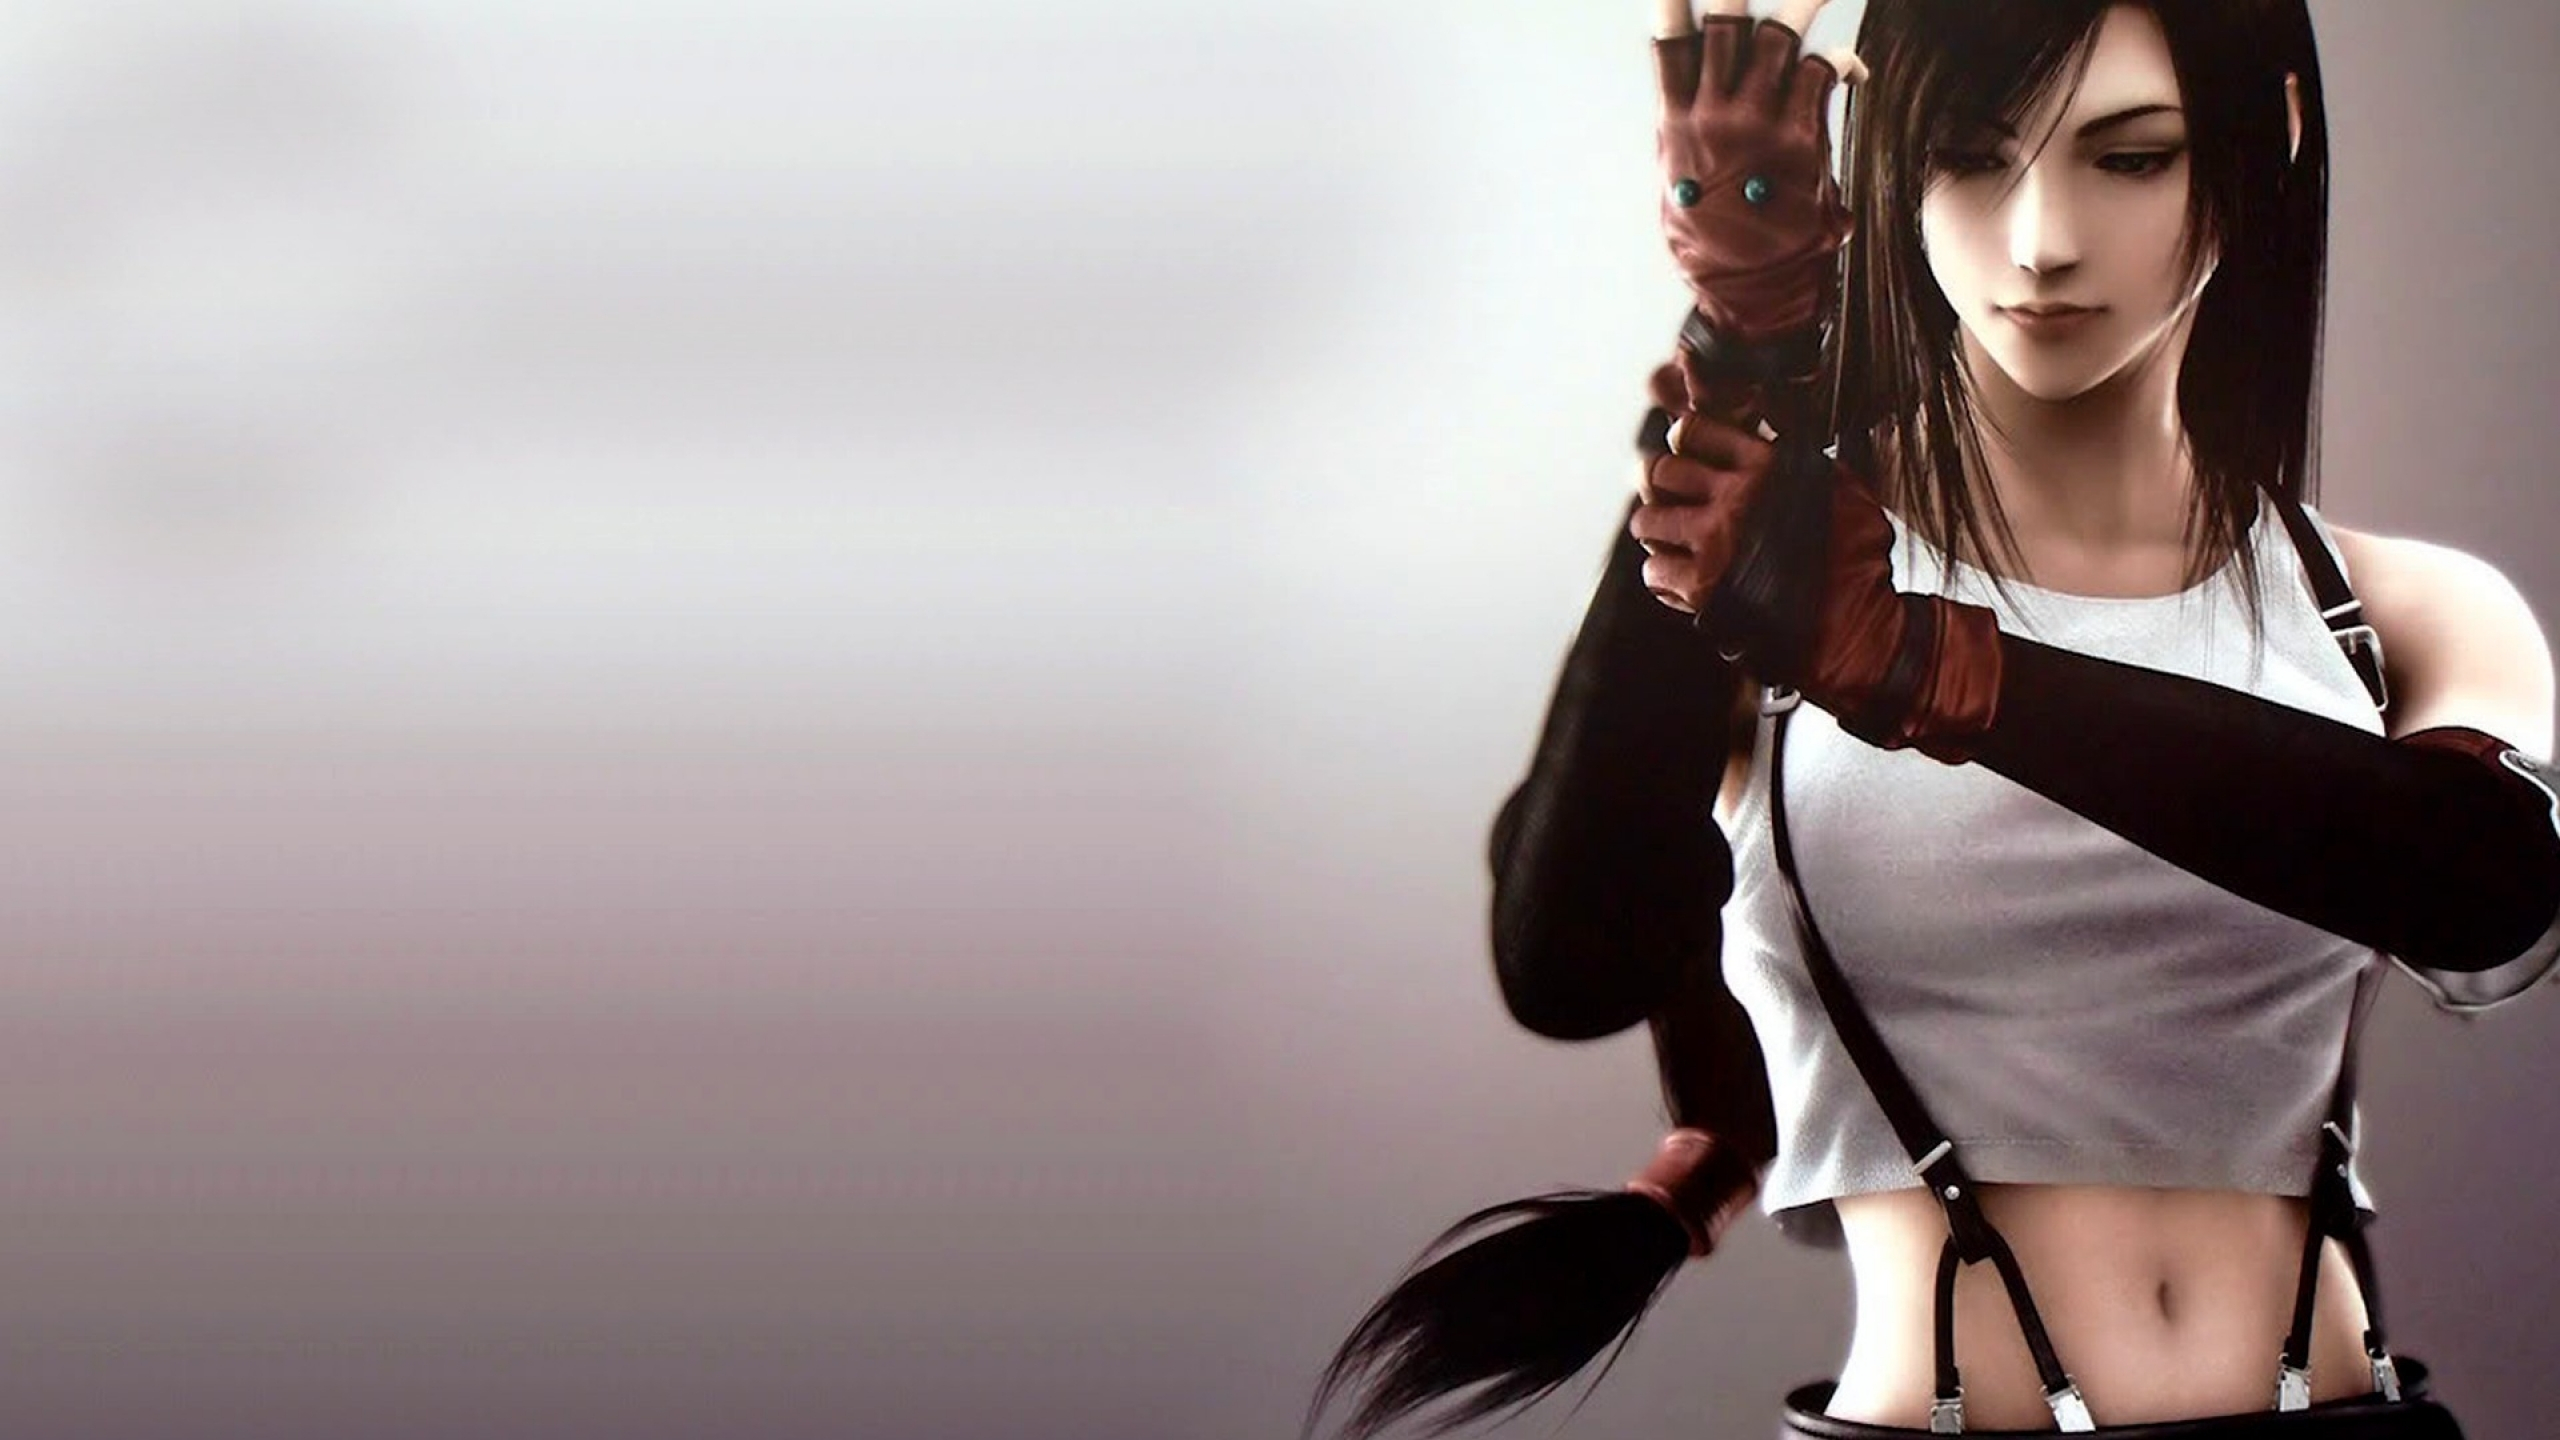 2560x1440 100+ Tifa Lockhart HD Wallpapers and Backgrounds